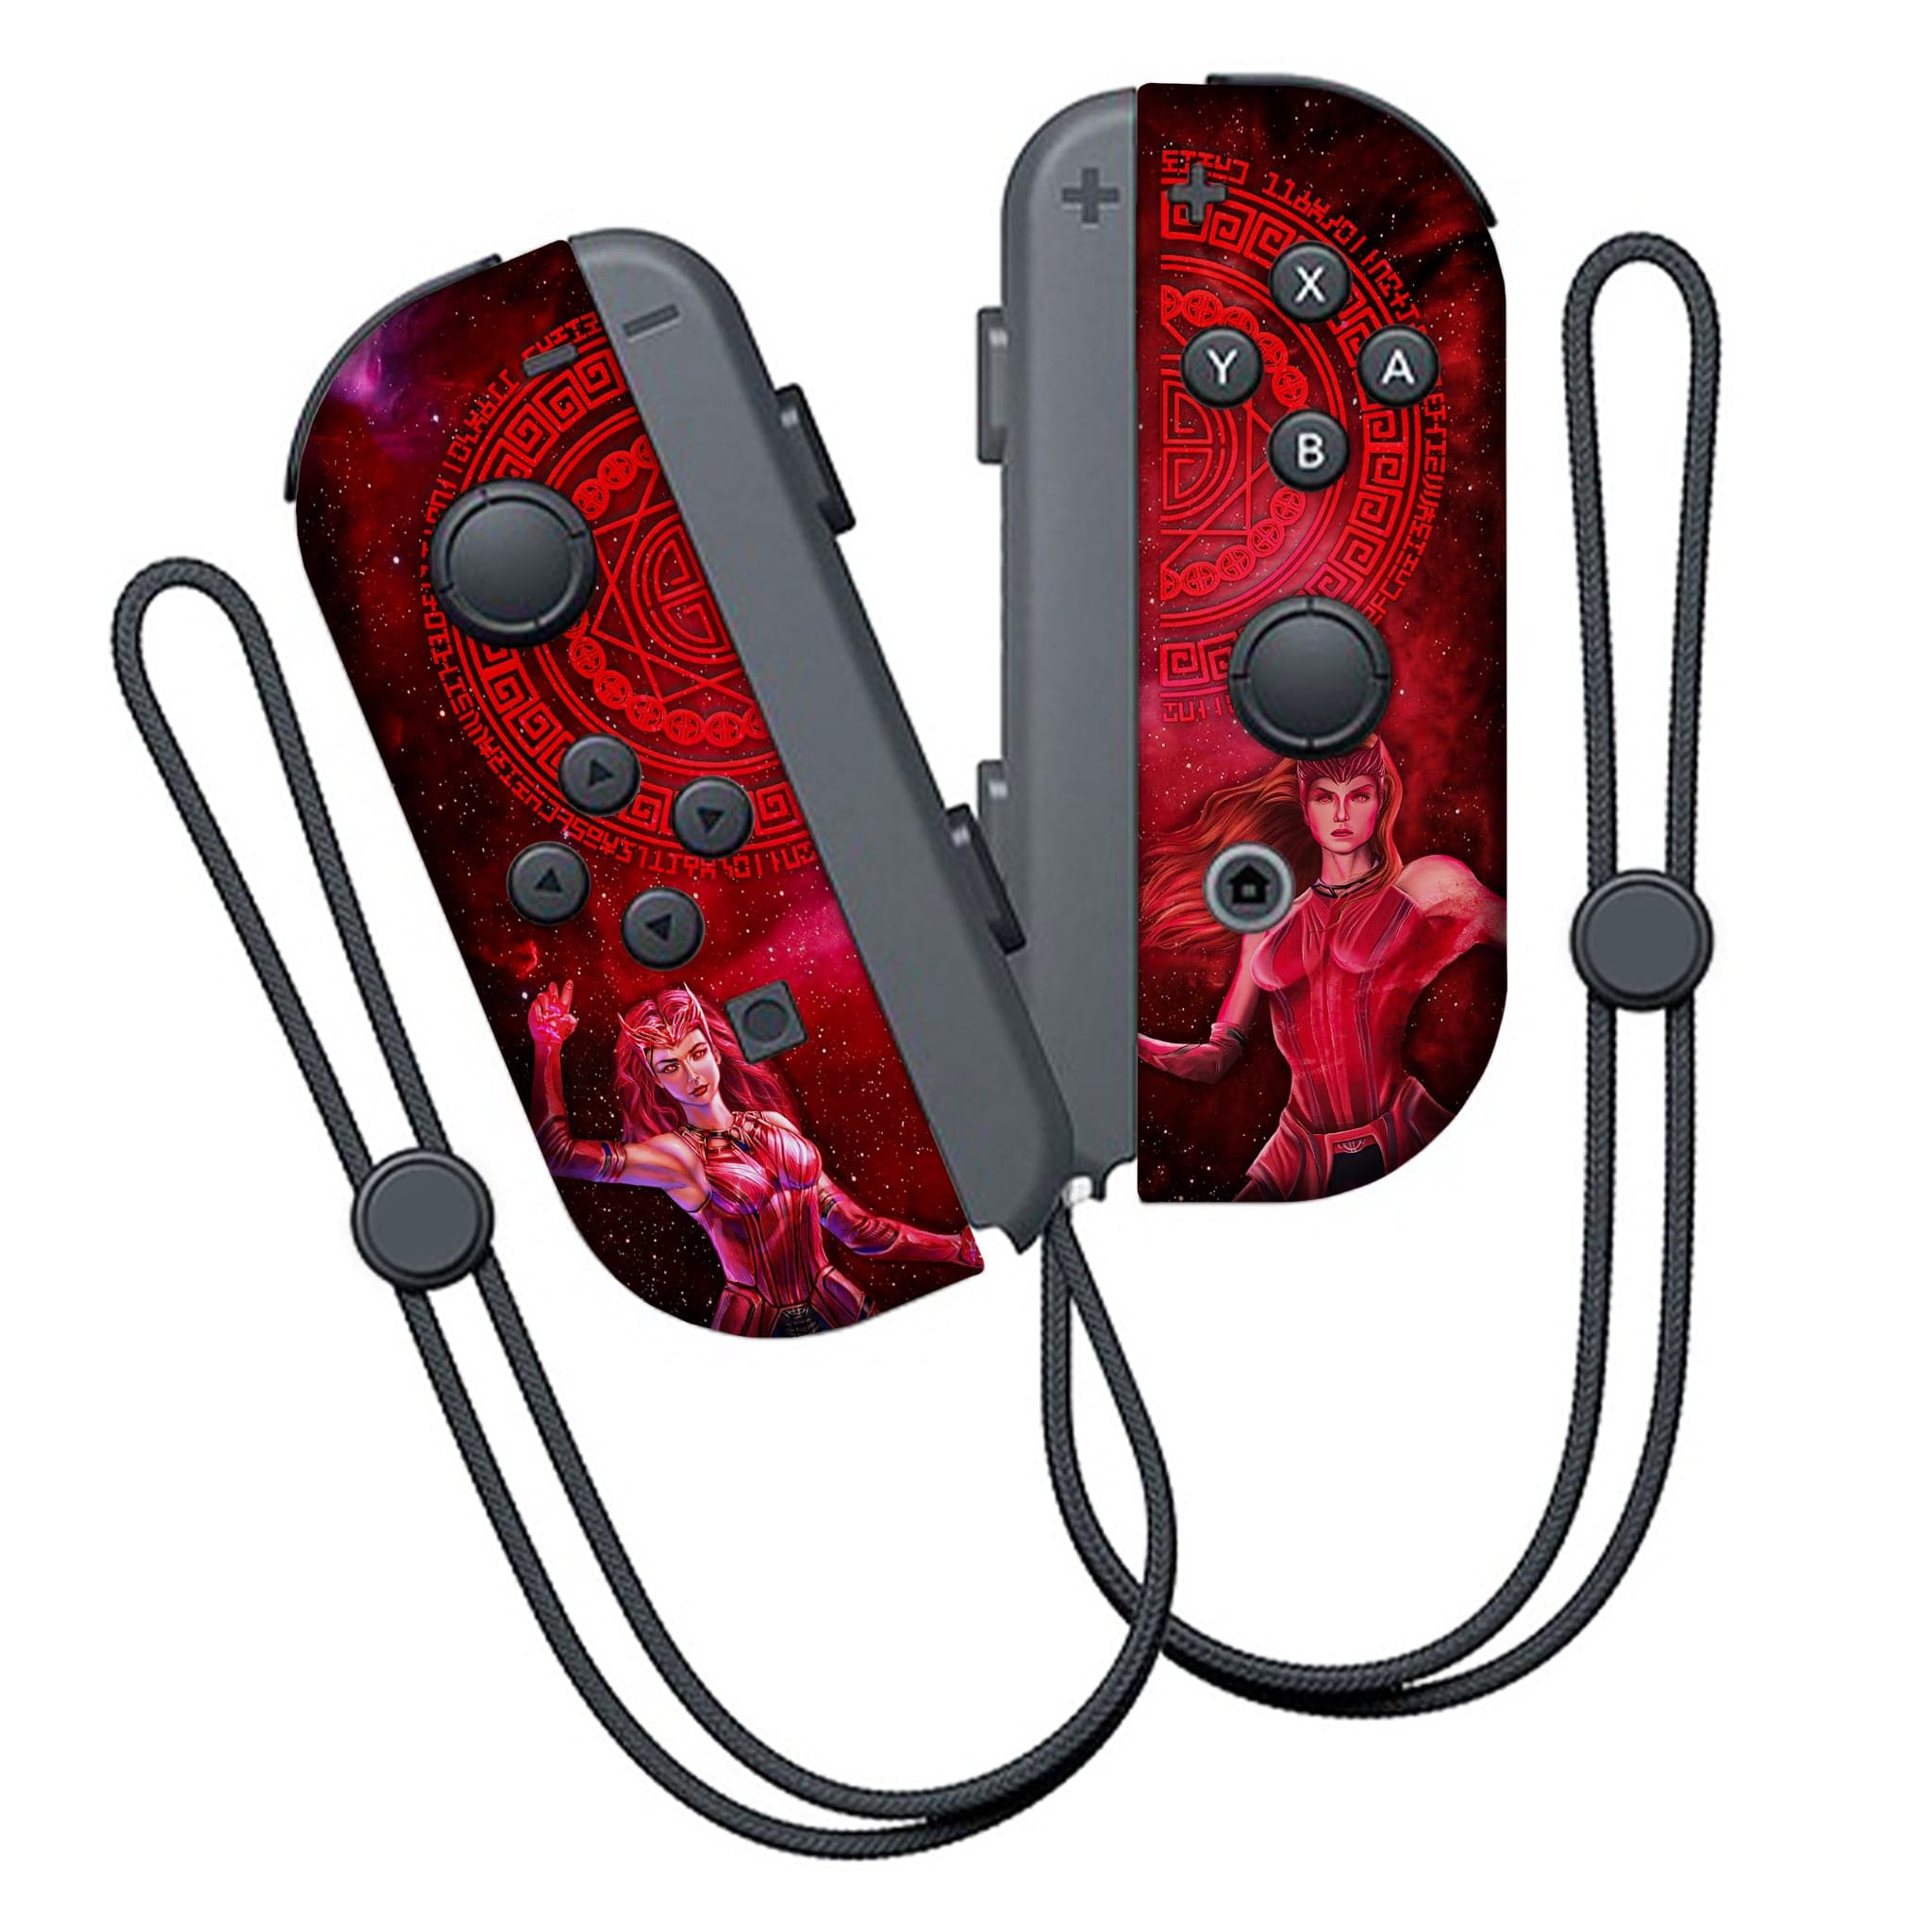 Wanda's Fury Joy-Con Left and Right Switch Controllers by Nintendo